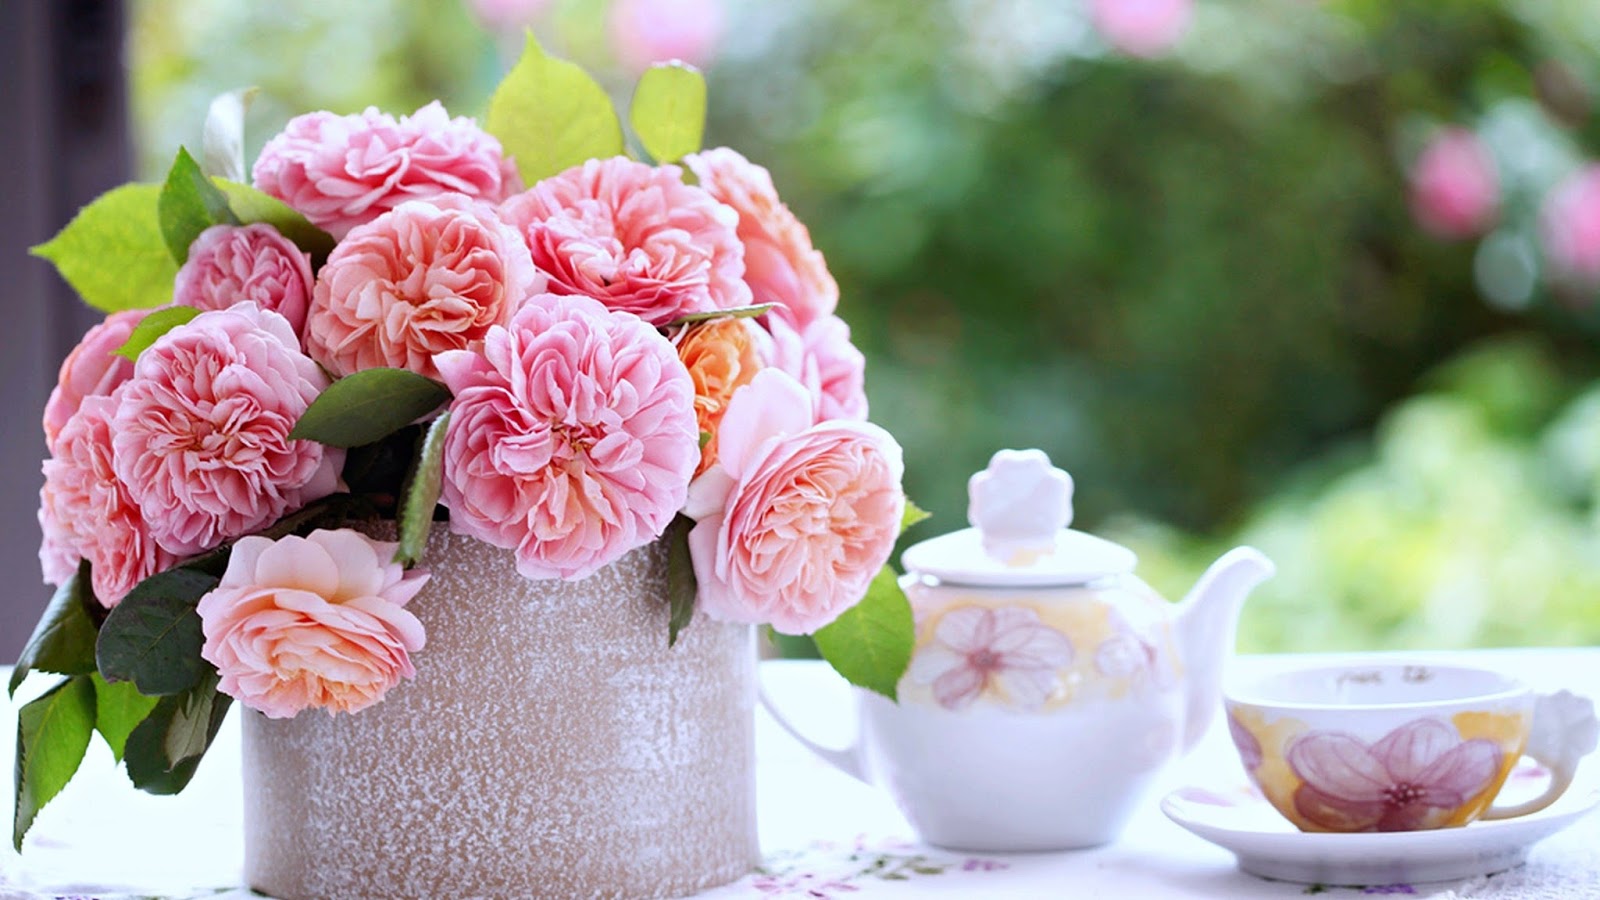 Good Morning Flowers With Cup - Good Morning With Flowers Full Hd , HD Wallpaper & Backgrounds